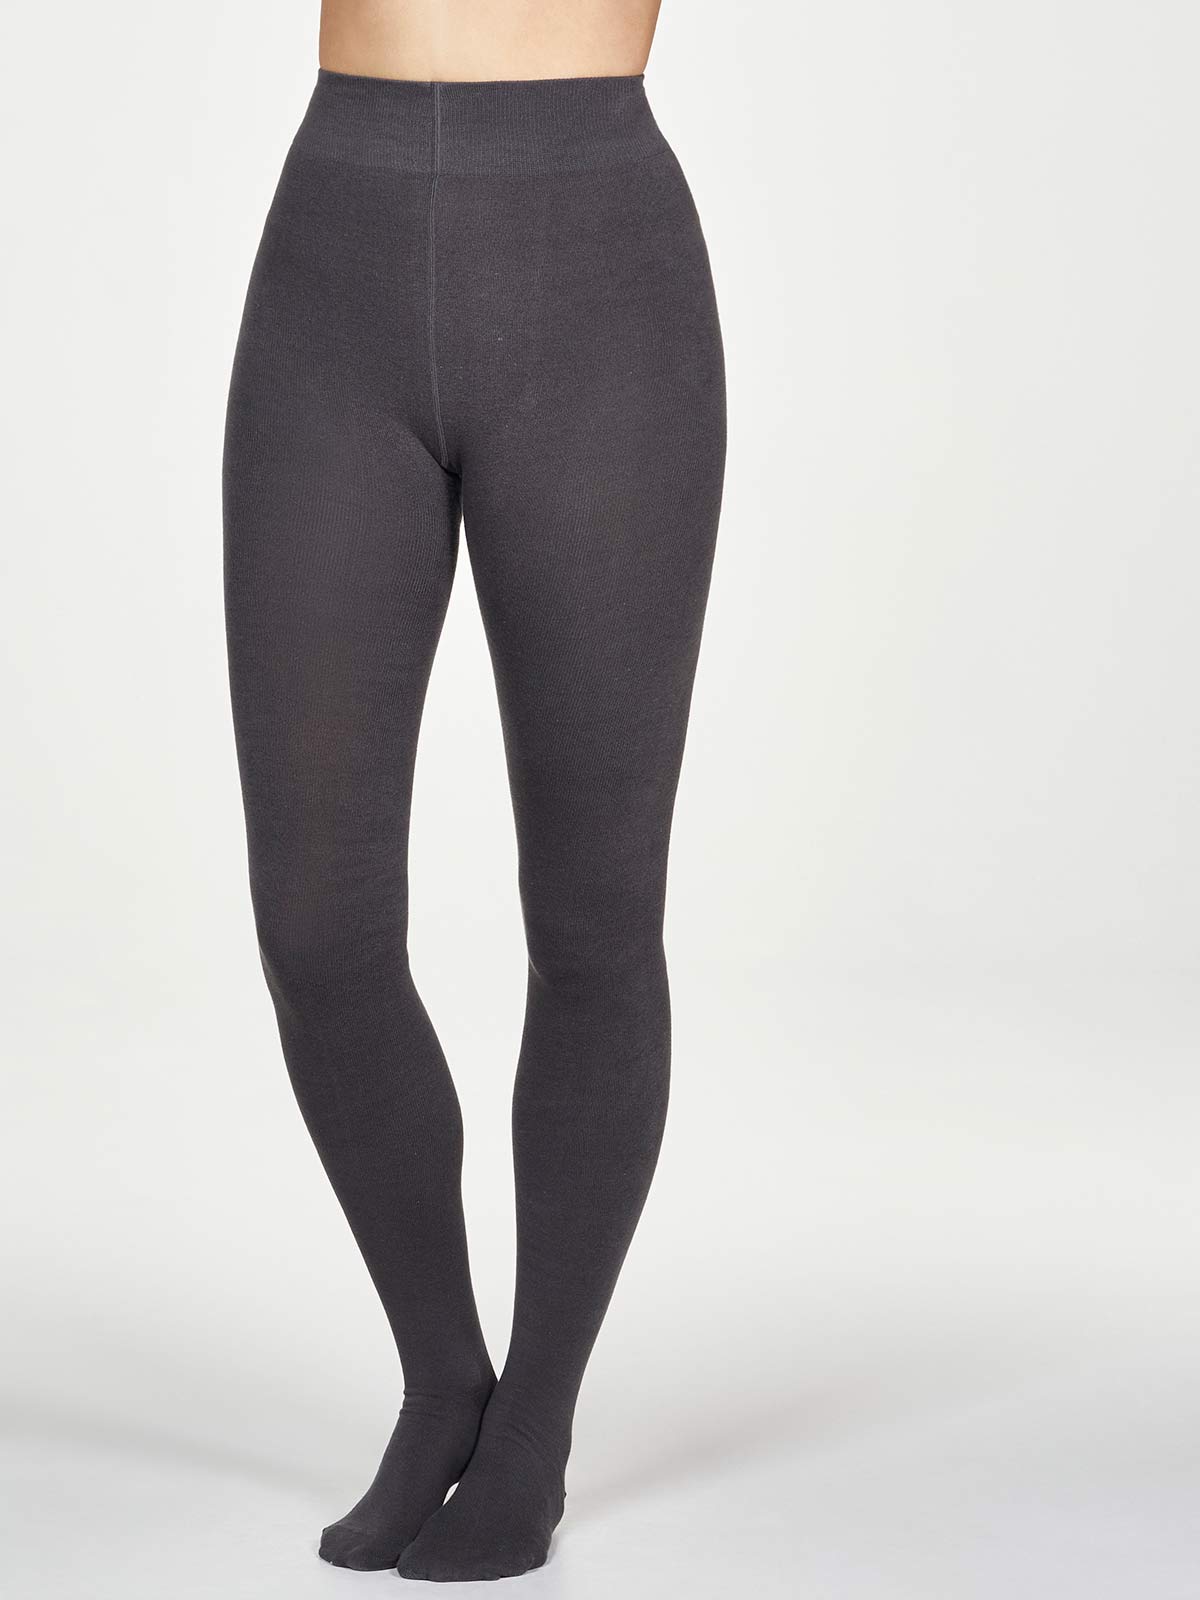 Women's Blissfully Soft Bamboo Tights in Graphite Grey - The Sockery